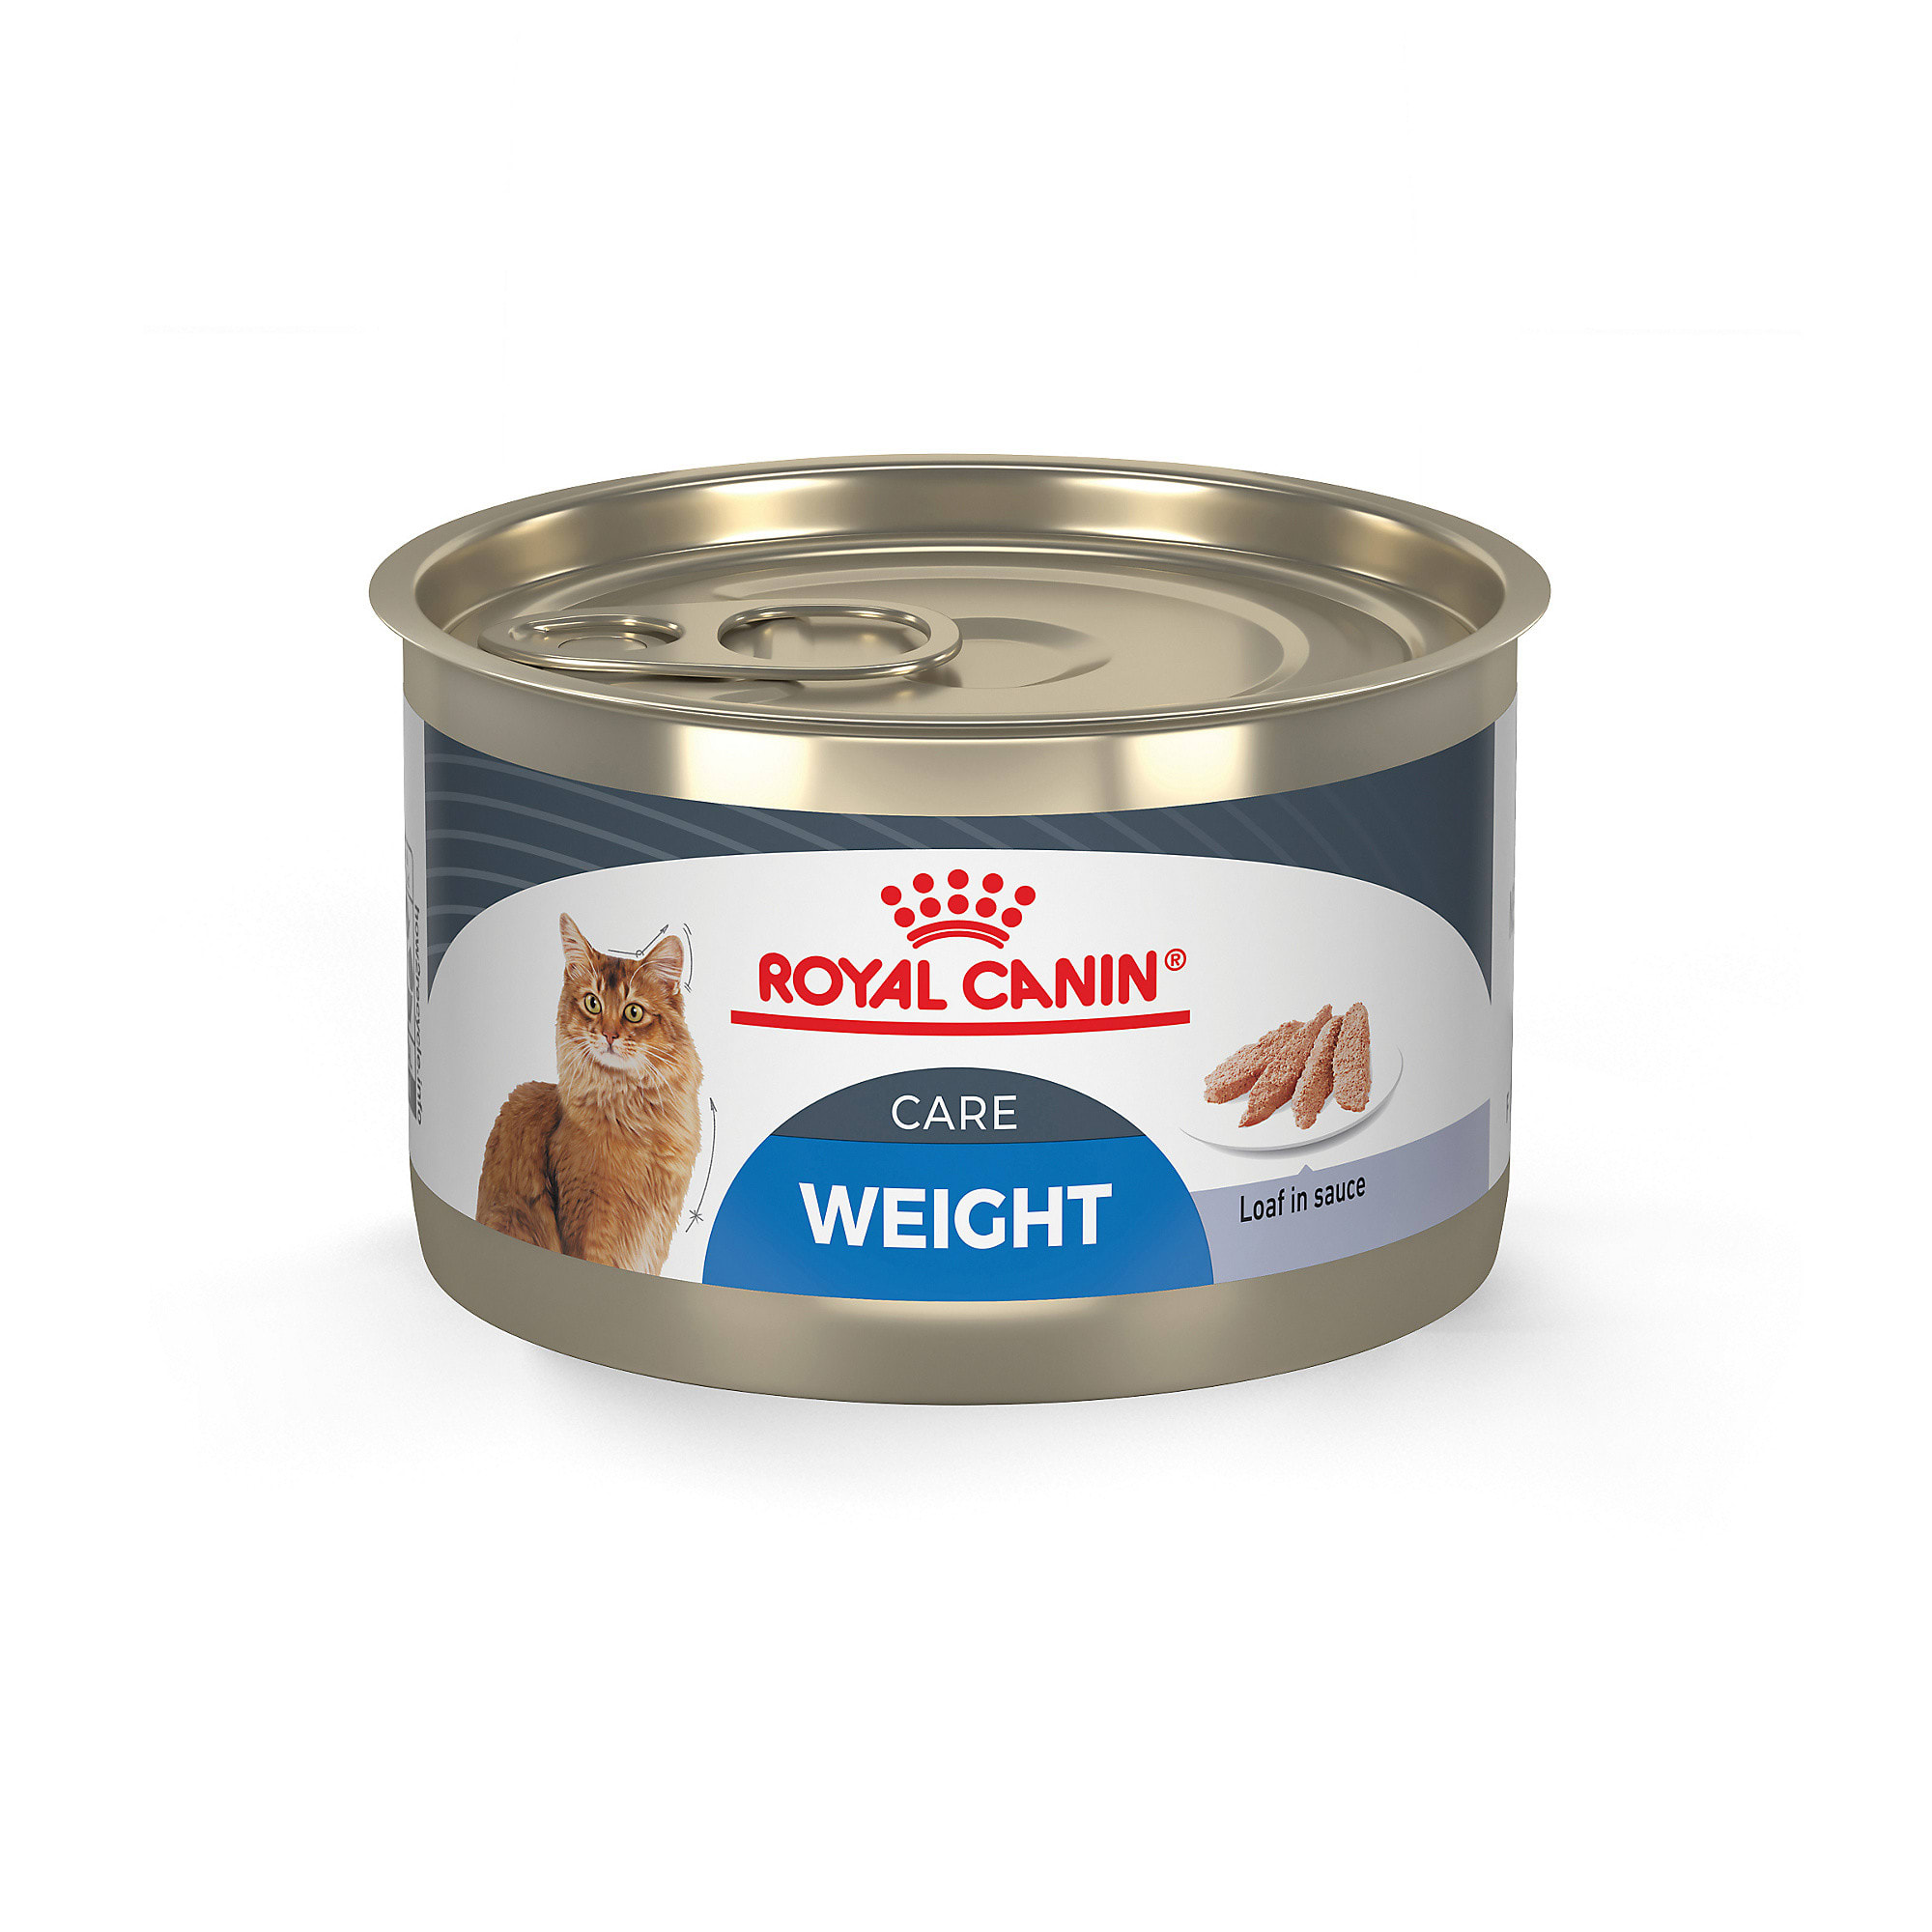 Royal Canin Feline Weight Care Loaf in Sauce Canned Adult Wet Cat Food, 5.1 oz., Case of 24 | Canned Cat